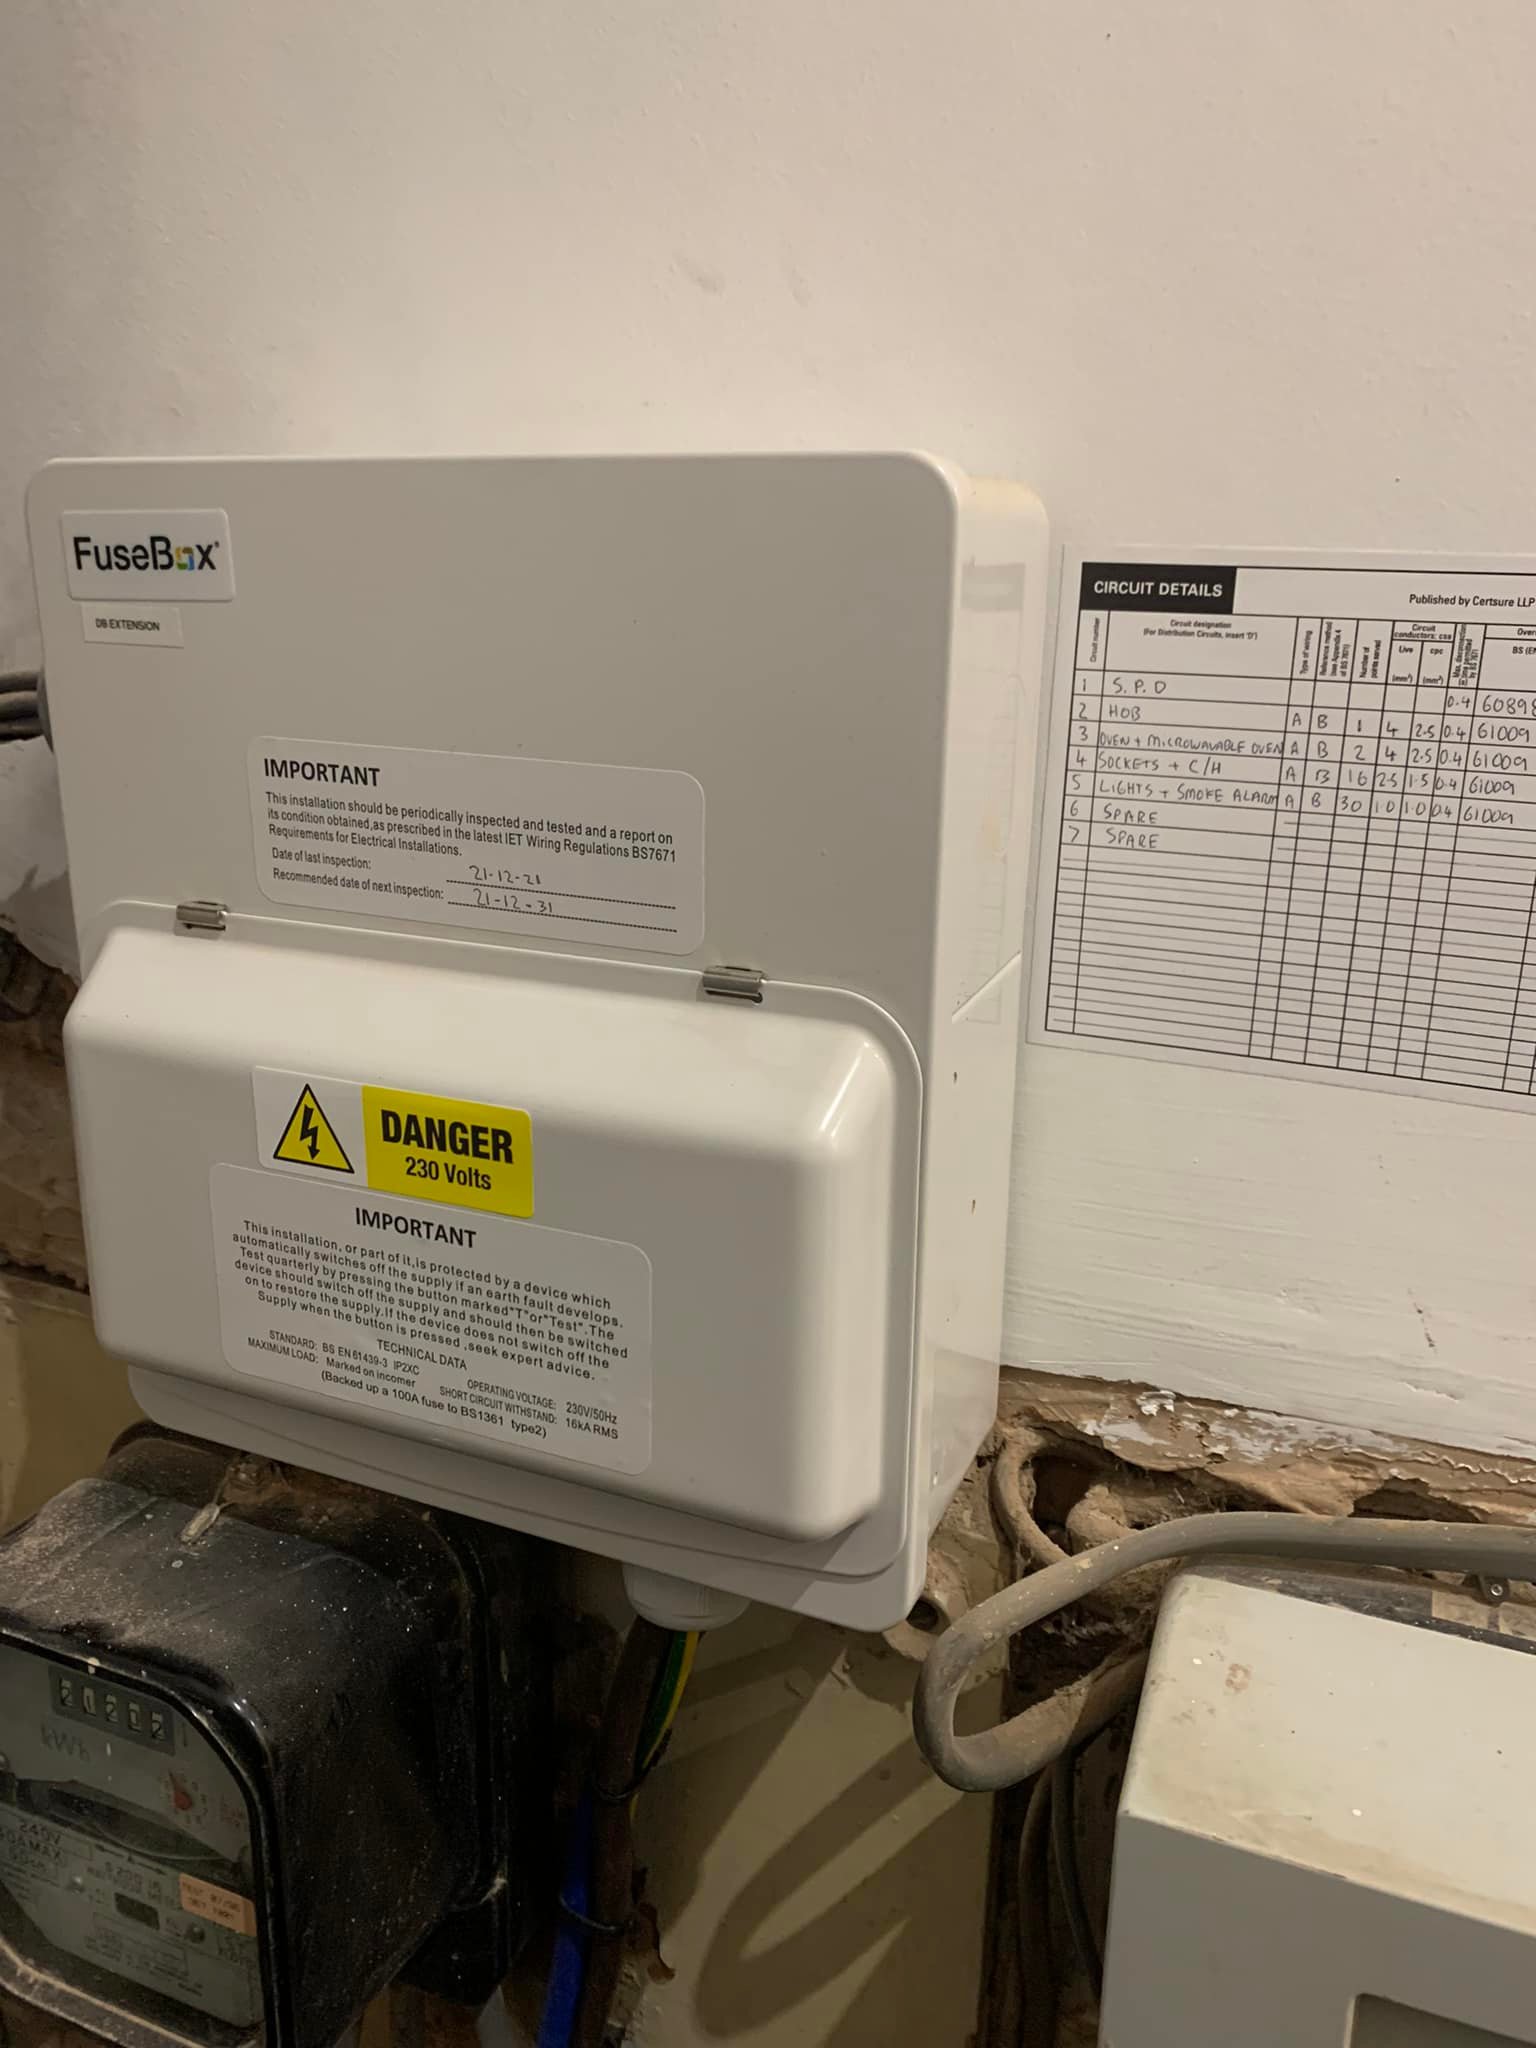 White fuse box with danger 230 volts yellow warning triangle